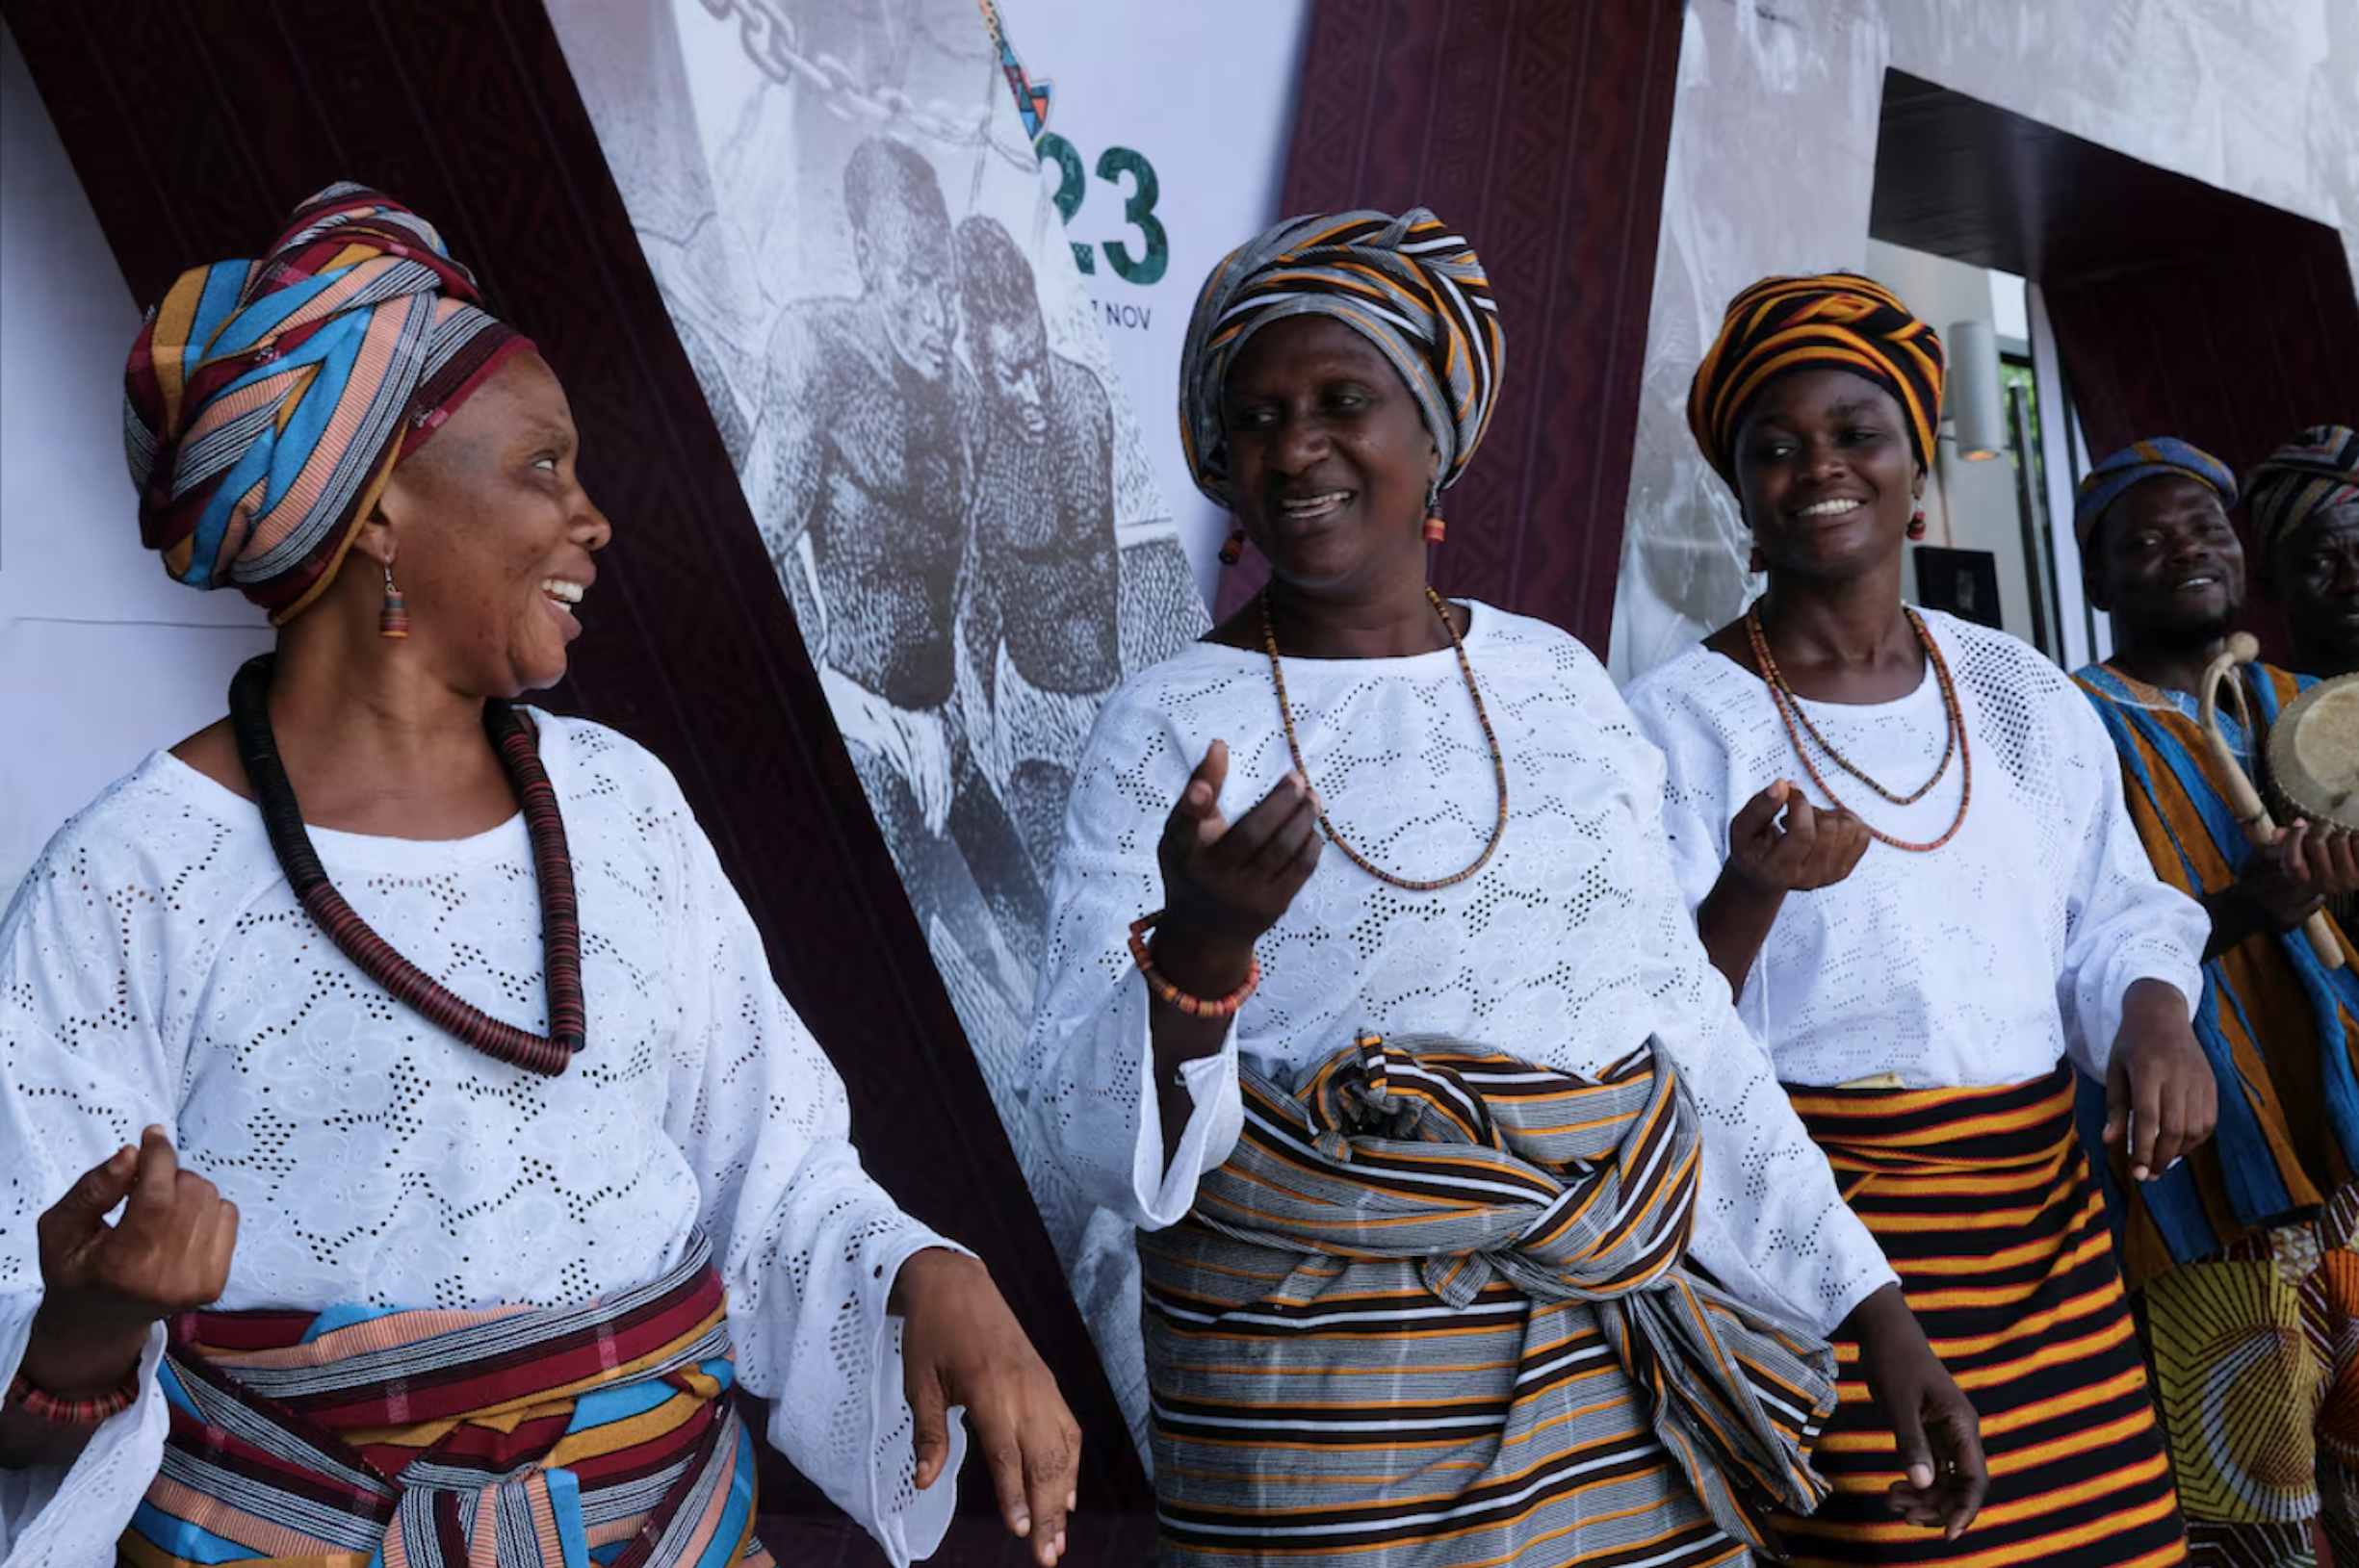 Women perform a traditional dance during the opening event of the African Union's conference on reparations in Accra